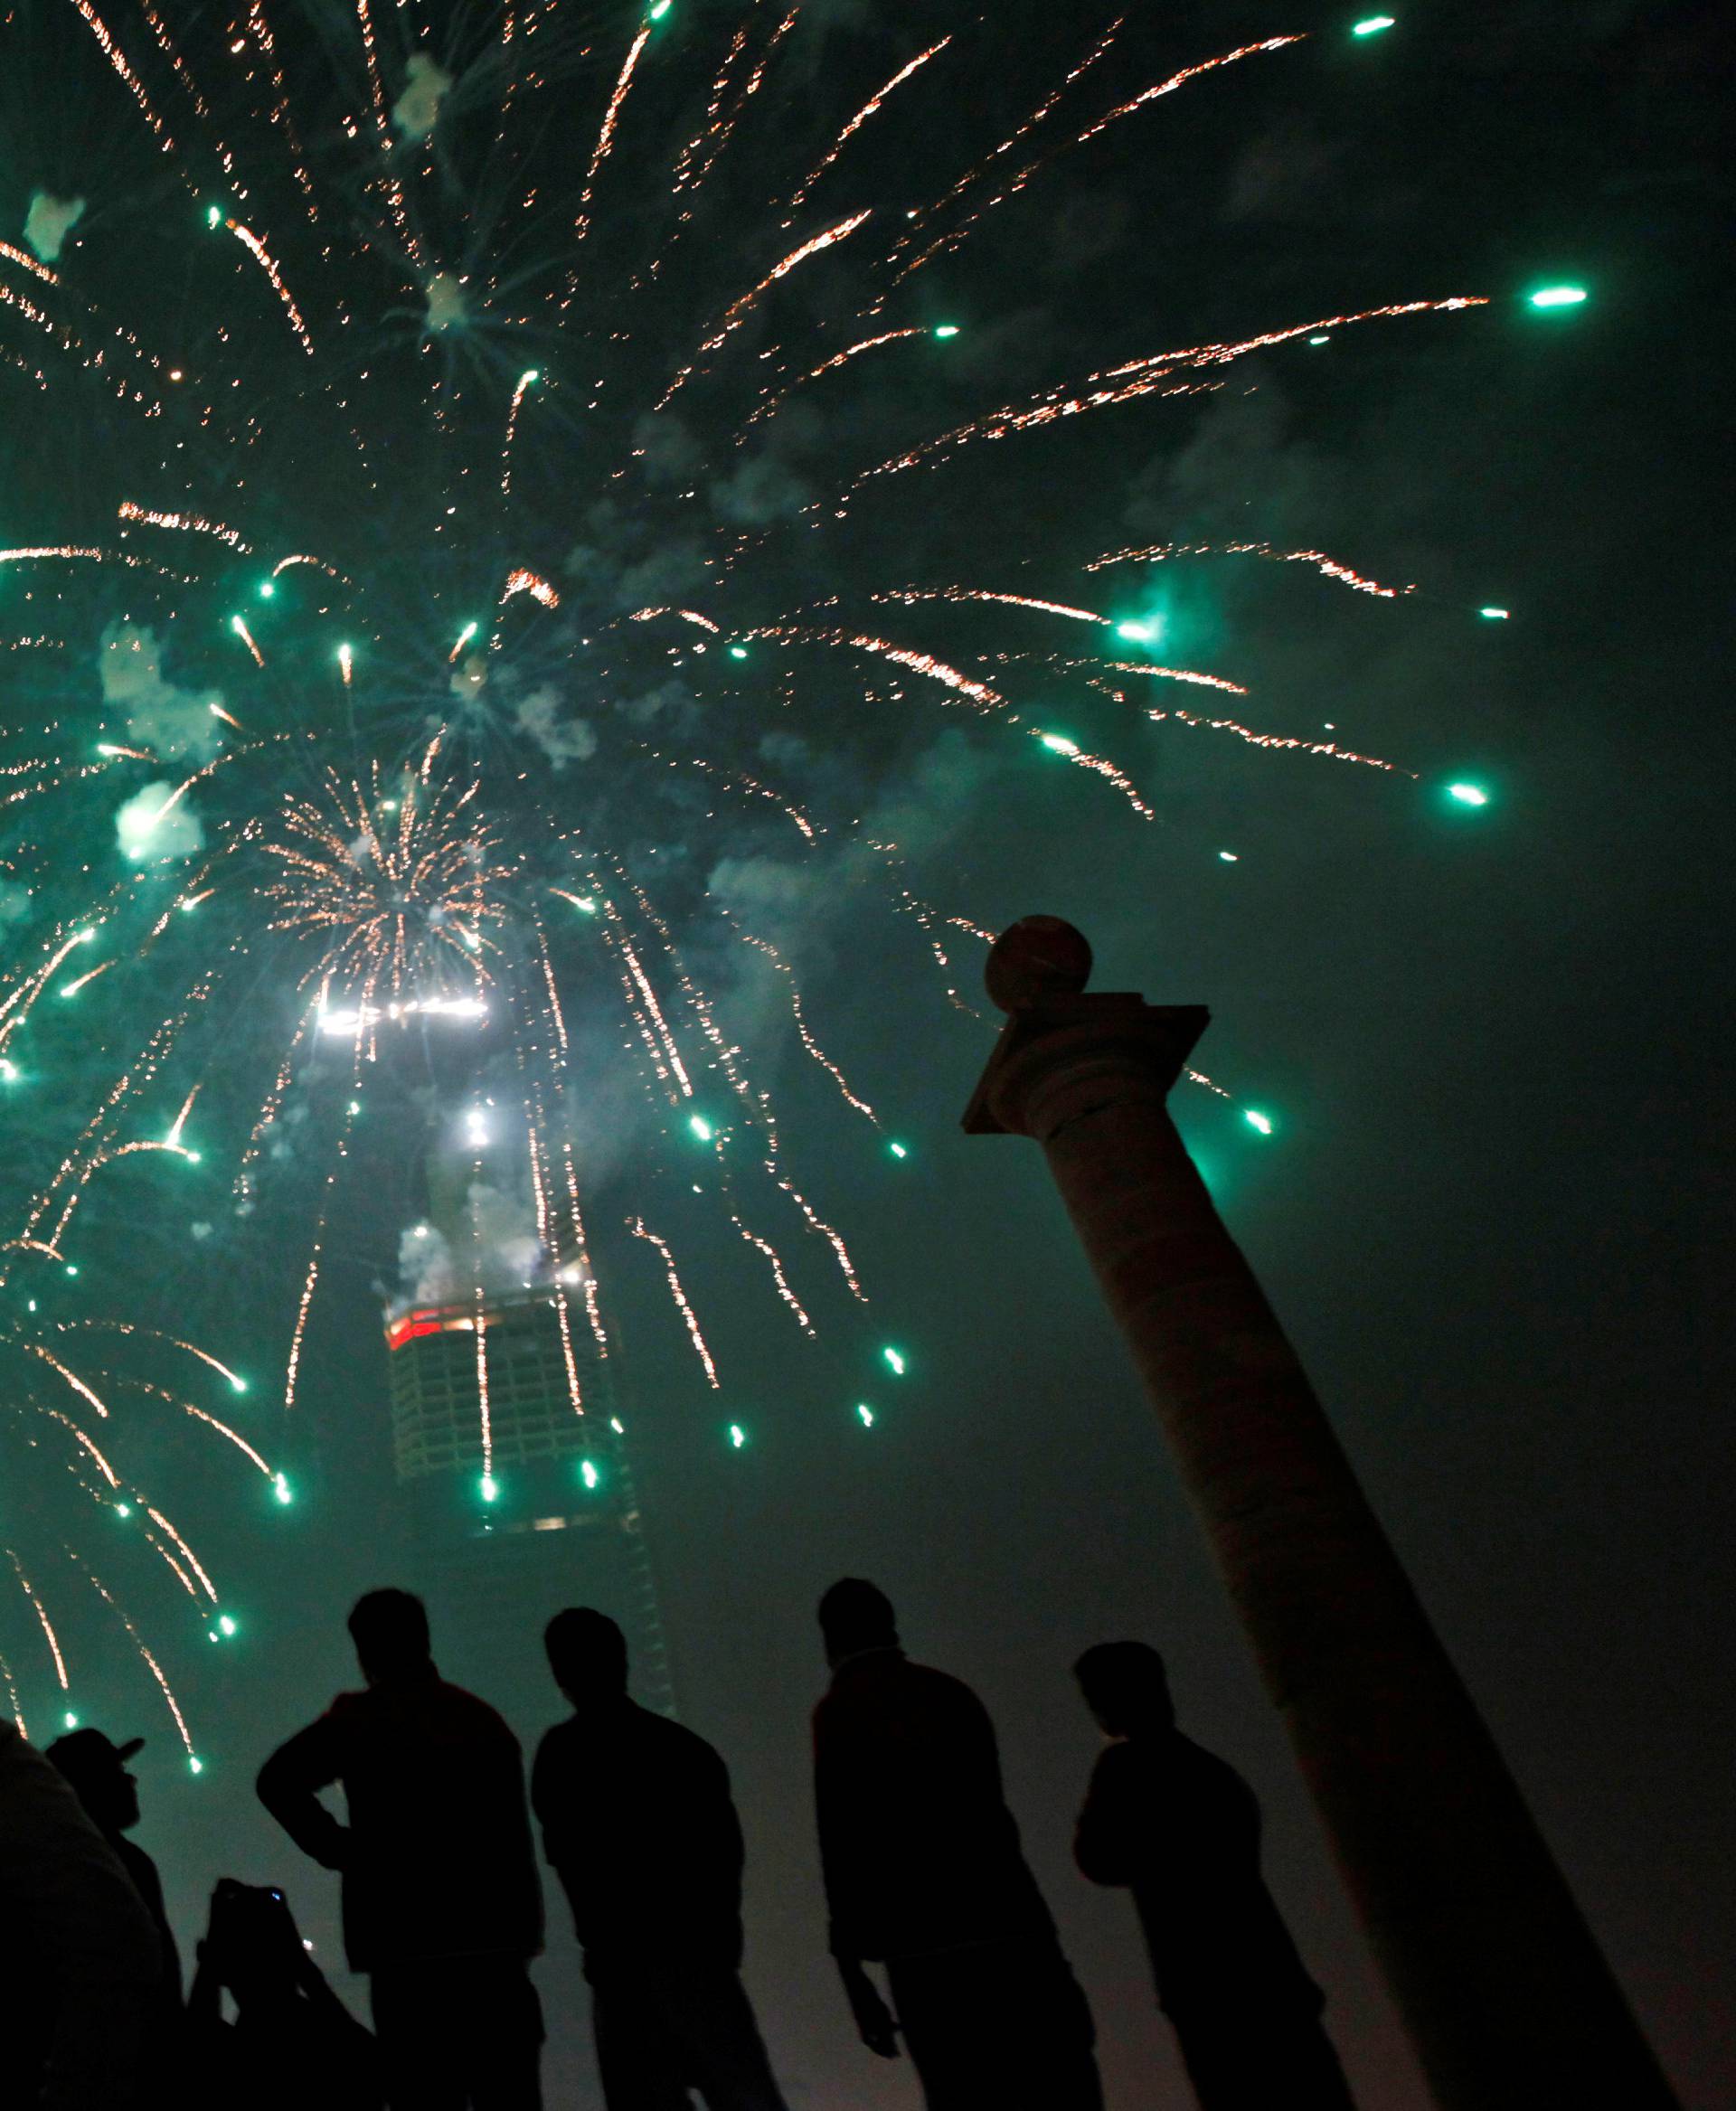 People gather to observe fireworks in celebration of the New Year in Karachi